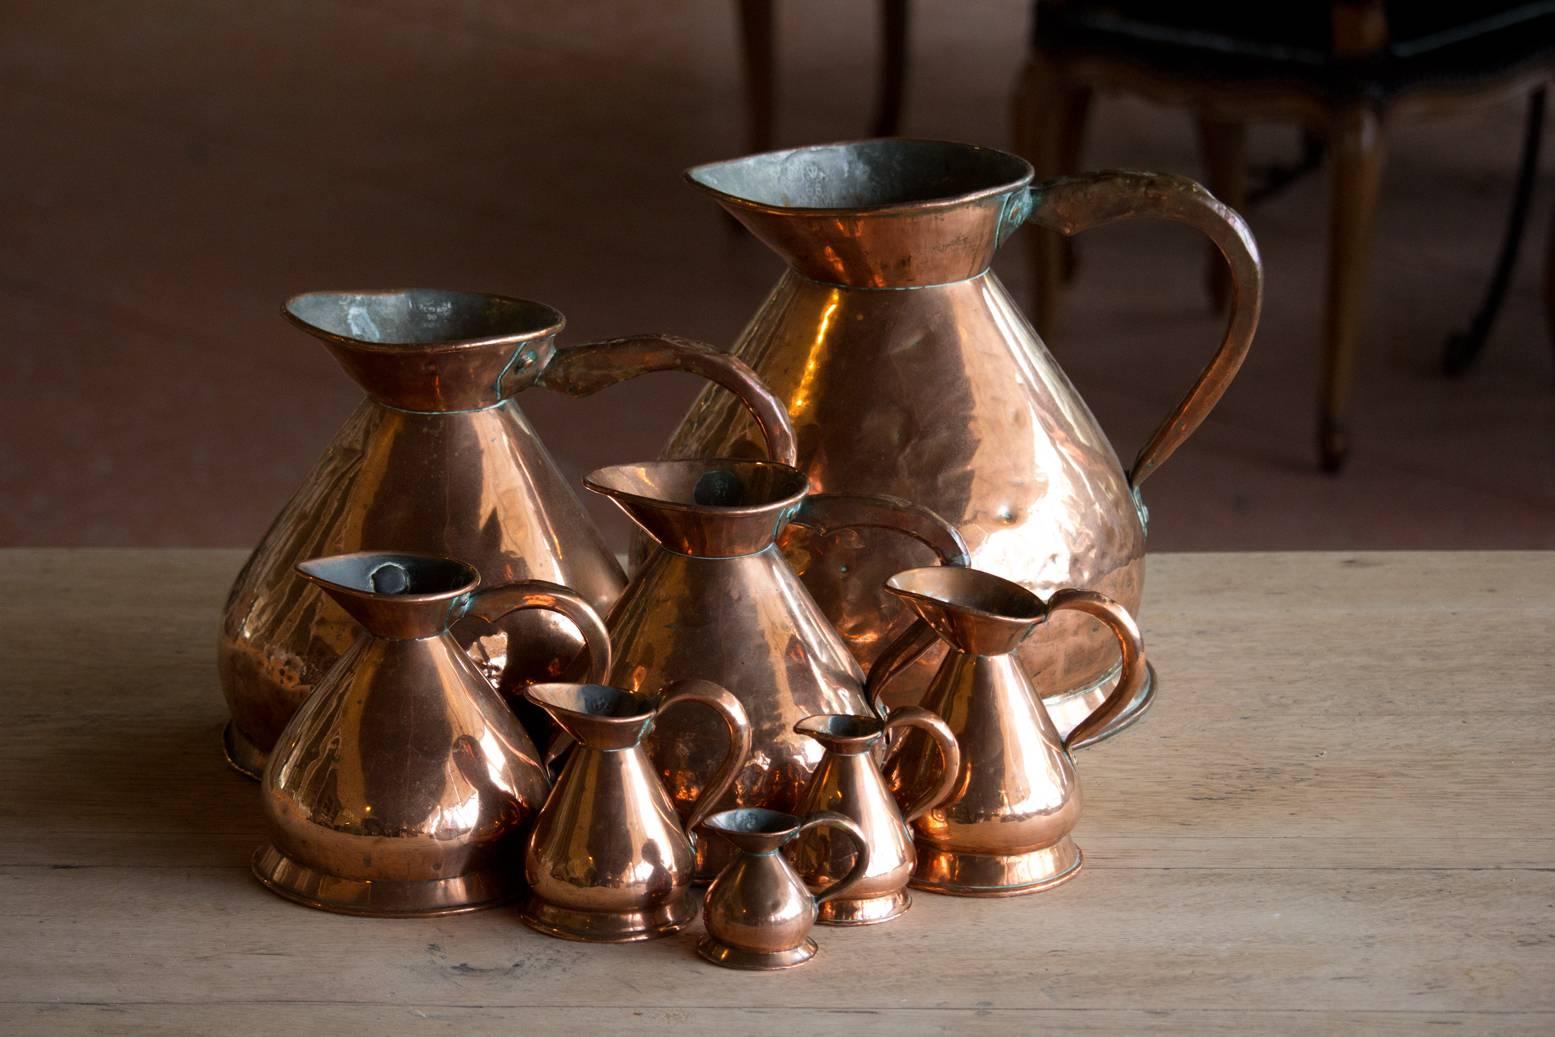 Antique set of eight copper Haystack measuring jugs, graduated in size. Each one has its British weights and measures lead seal applied by the official who would inspect them to make sure the publican was not cheating on the quantity. It would